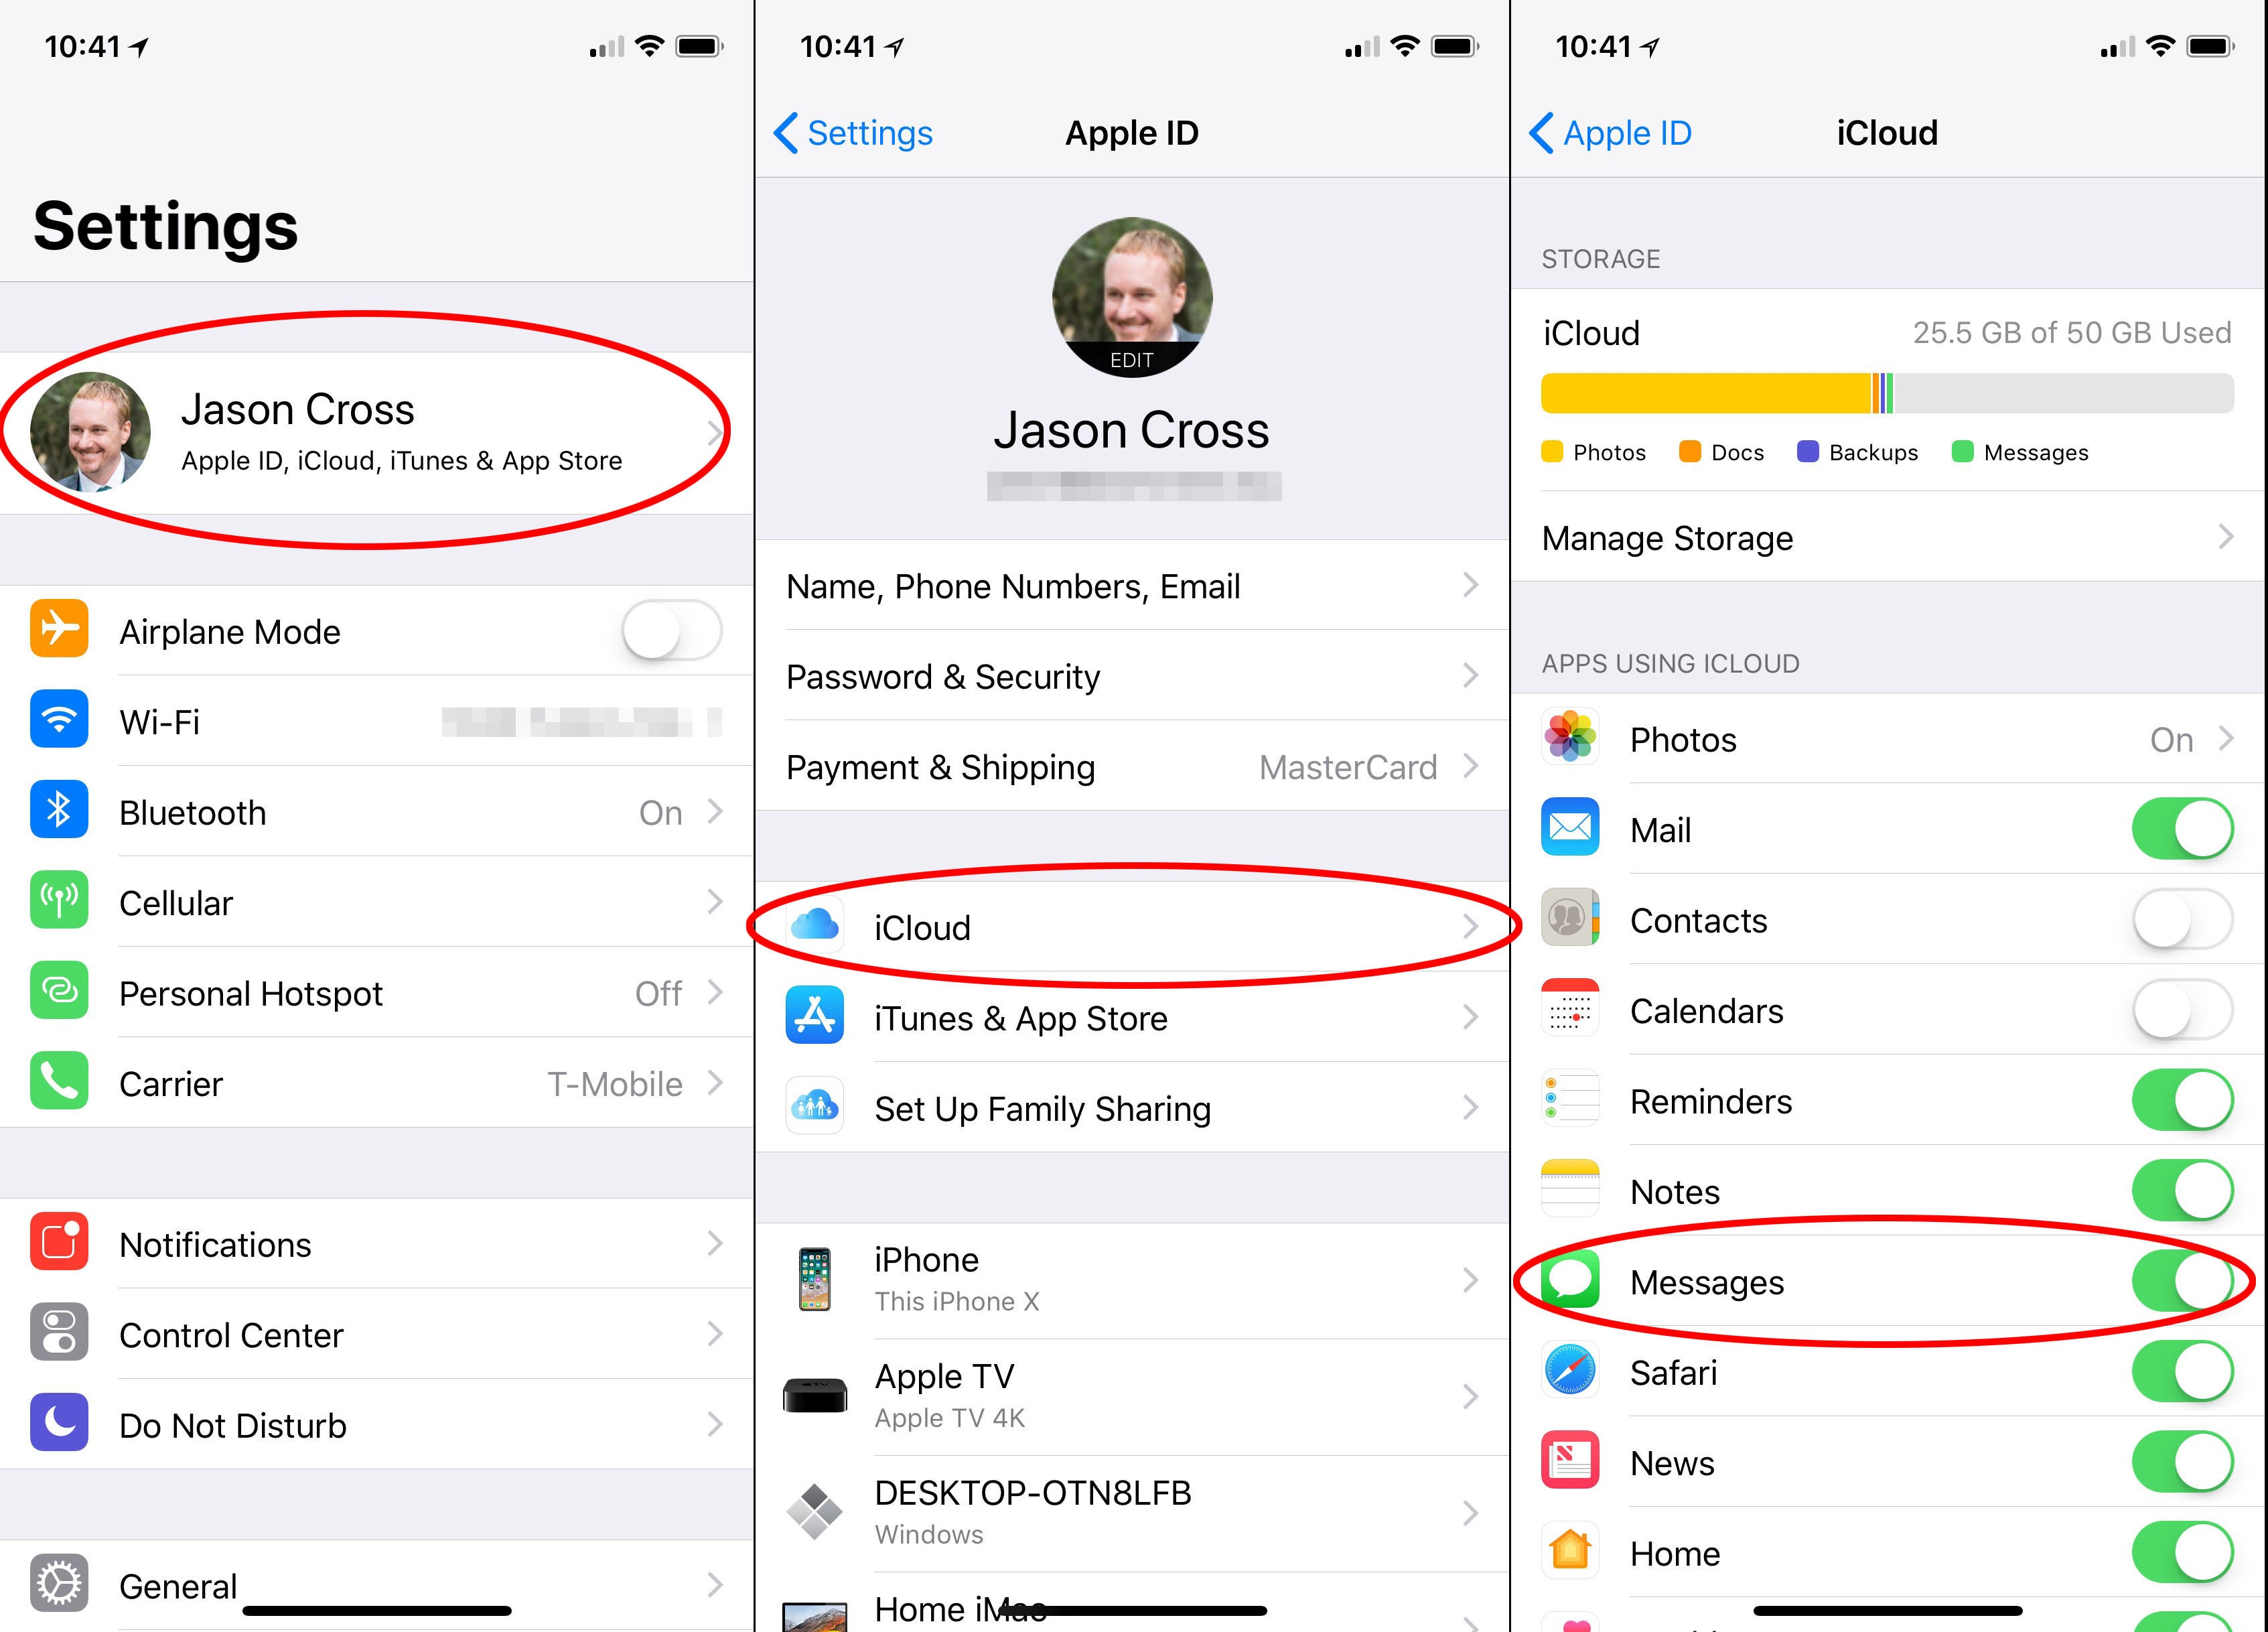 How to enable Messages in iCloud Macworld